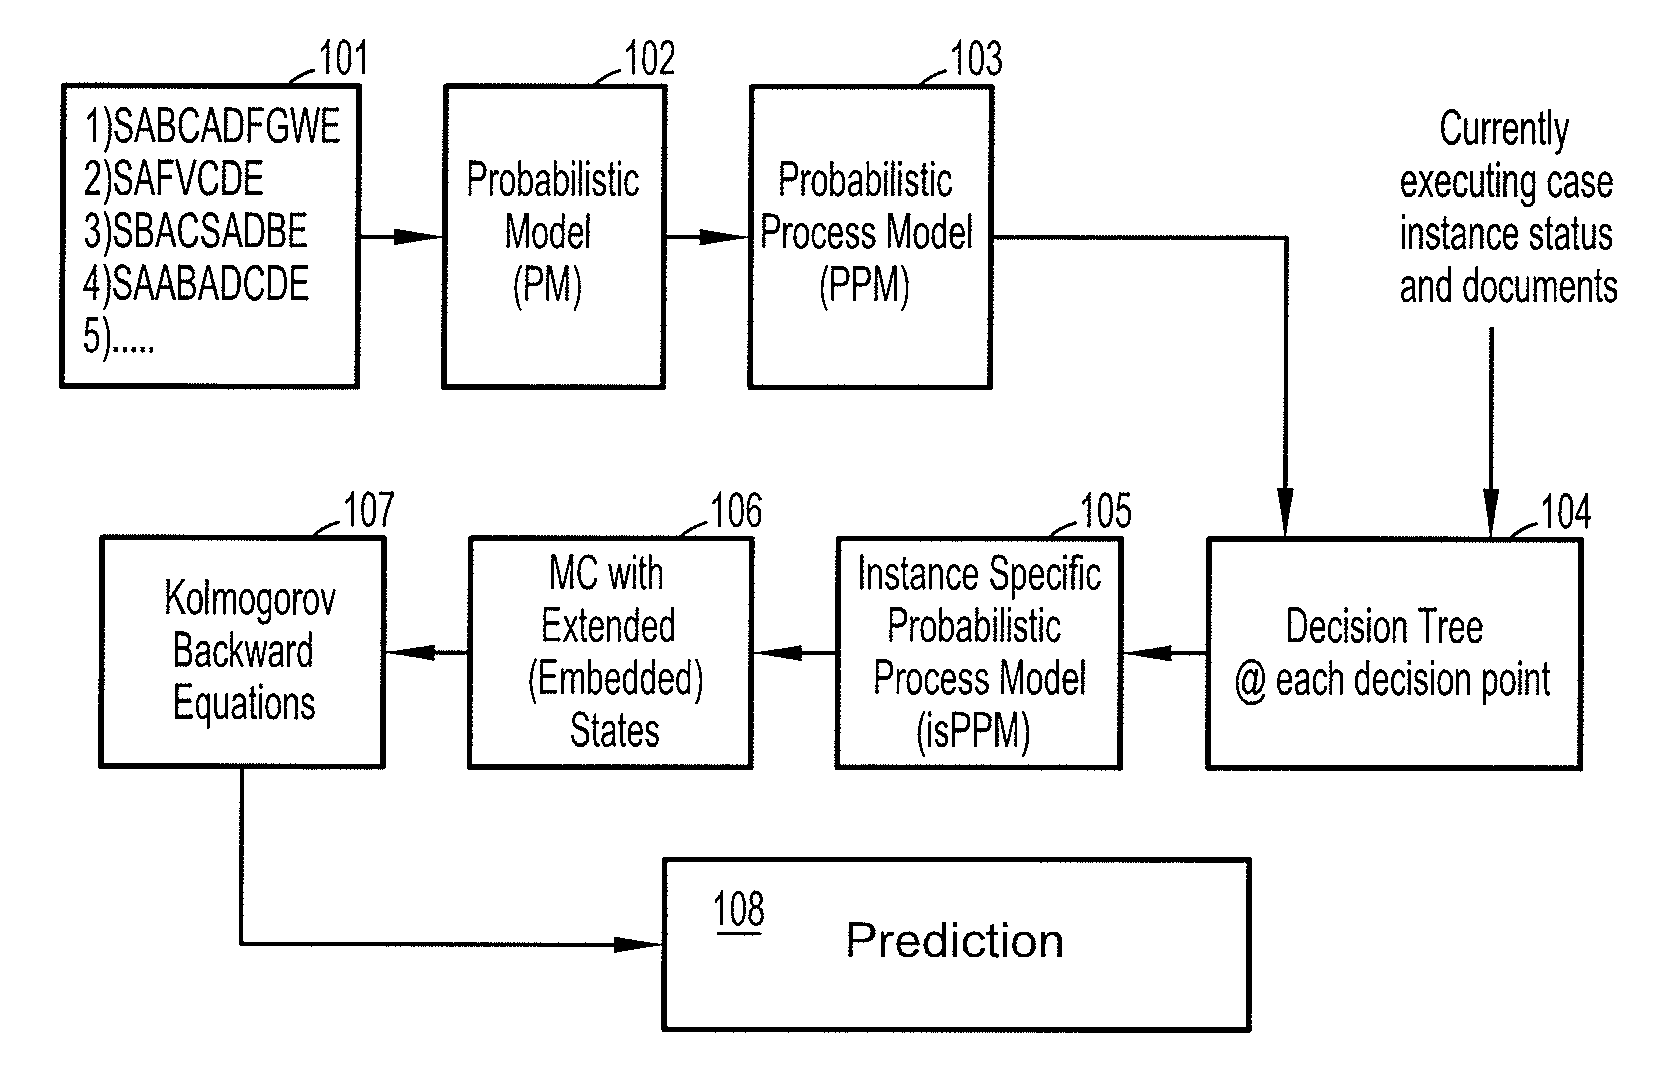 Predicting Outcomes of a Content Driven Process Instance Execution